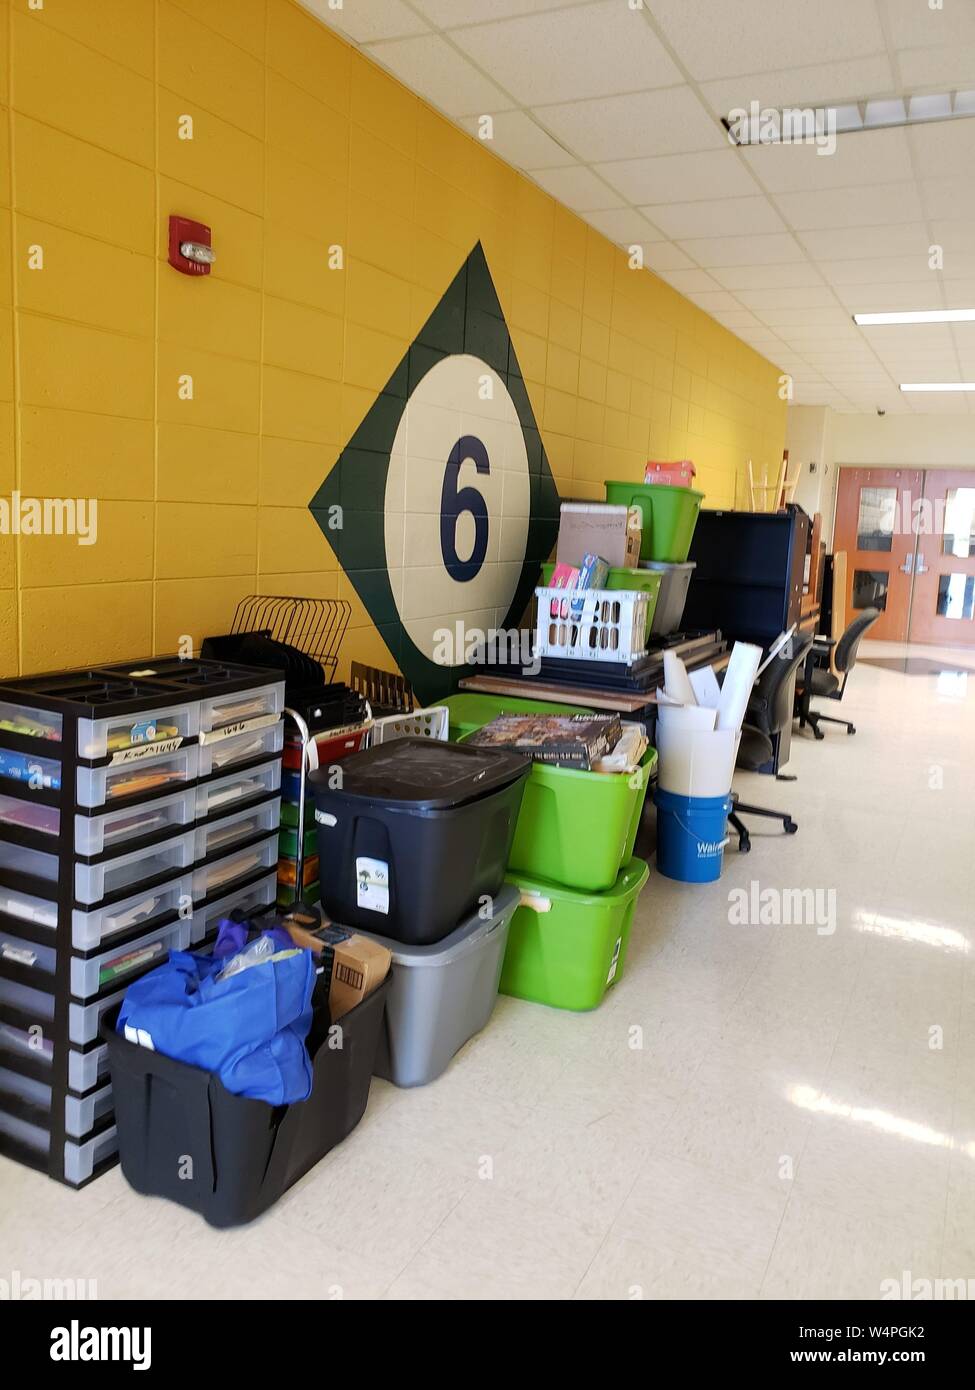 Classroom contents are emptied into hallway for summer cleaning by custodial staff in July, 2019. Stock Photo